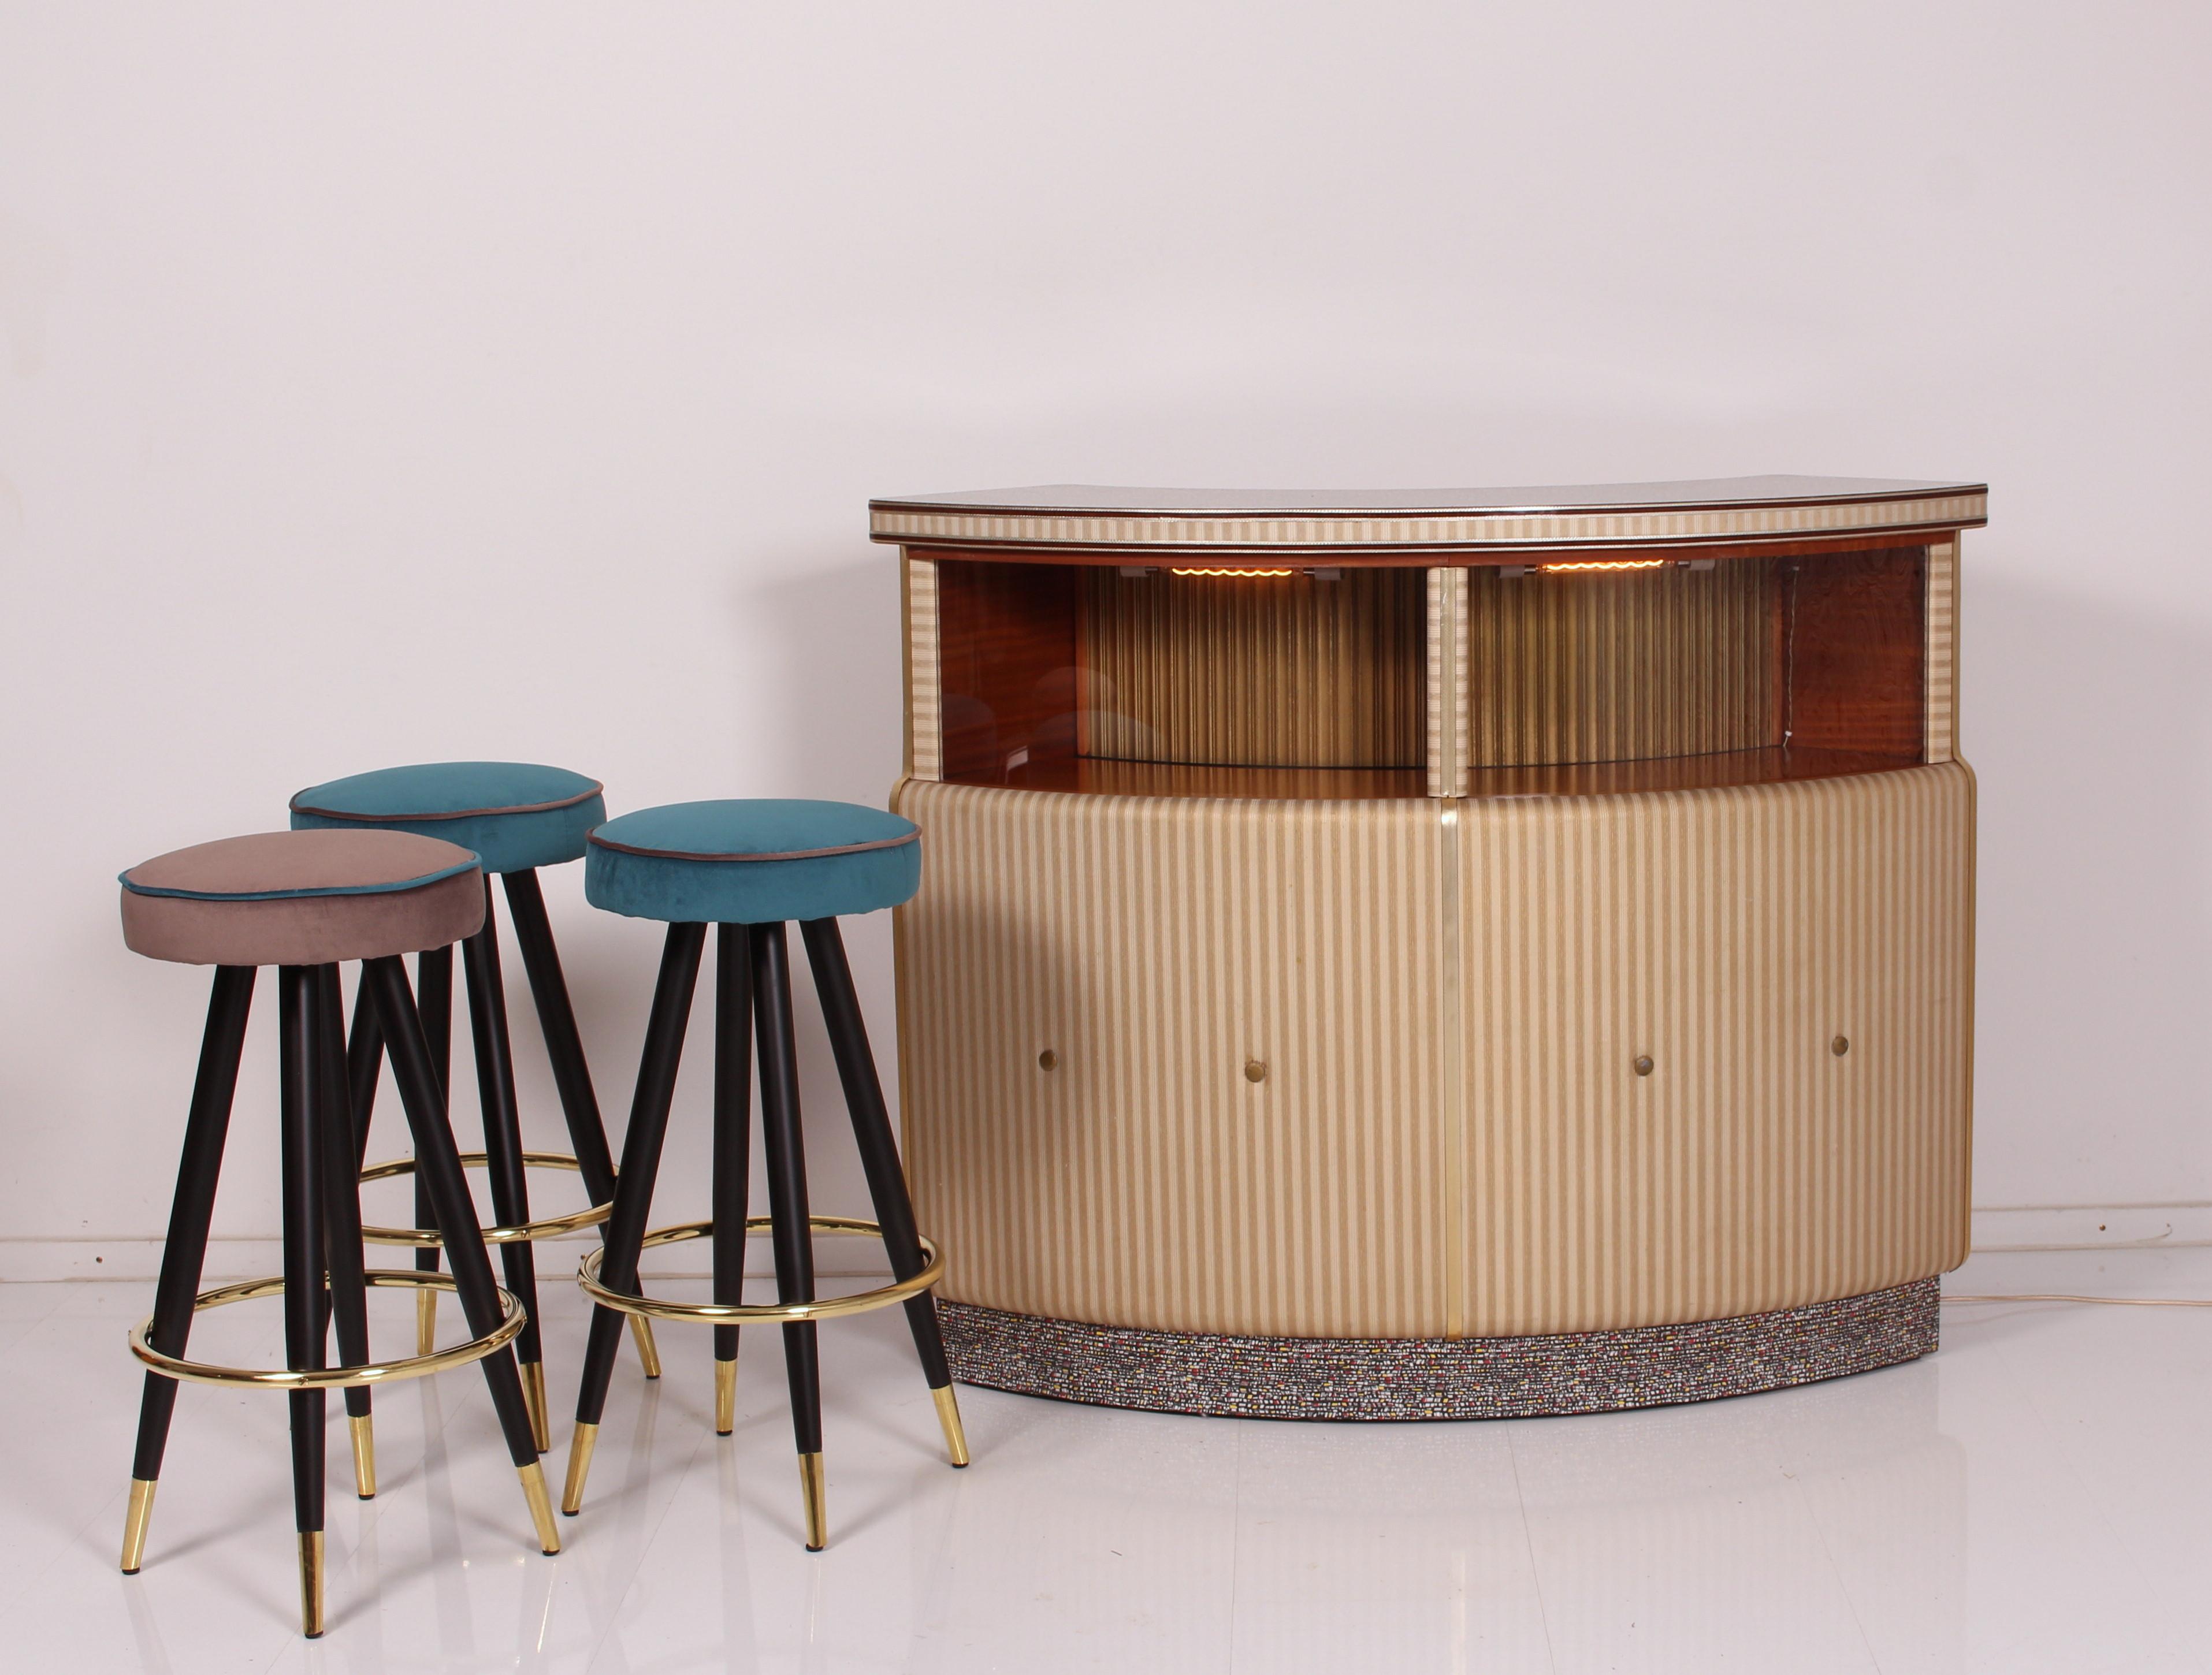 This spectacular English Cocktail Bar is in amazing good condition - fully revised and rewired. 
Its solid wooden body is veneered with Tola Wood. 
(botanic name: Gossweilerodendron Balsamiferum :: West and Central Afrika)
elegant curved teak